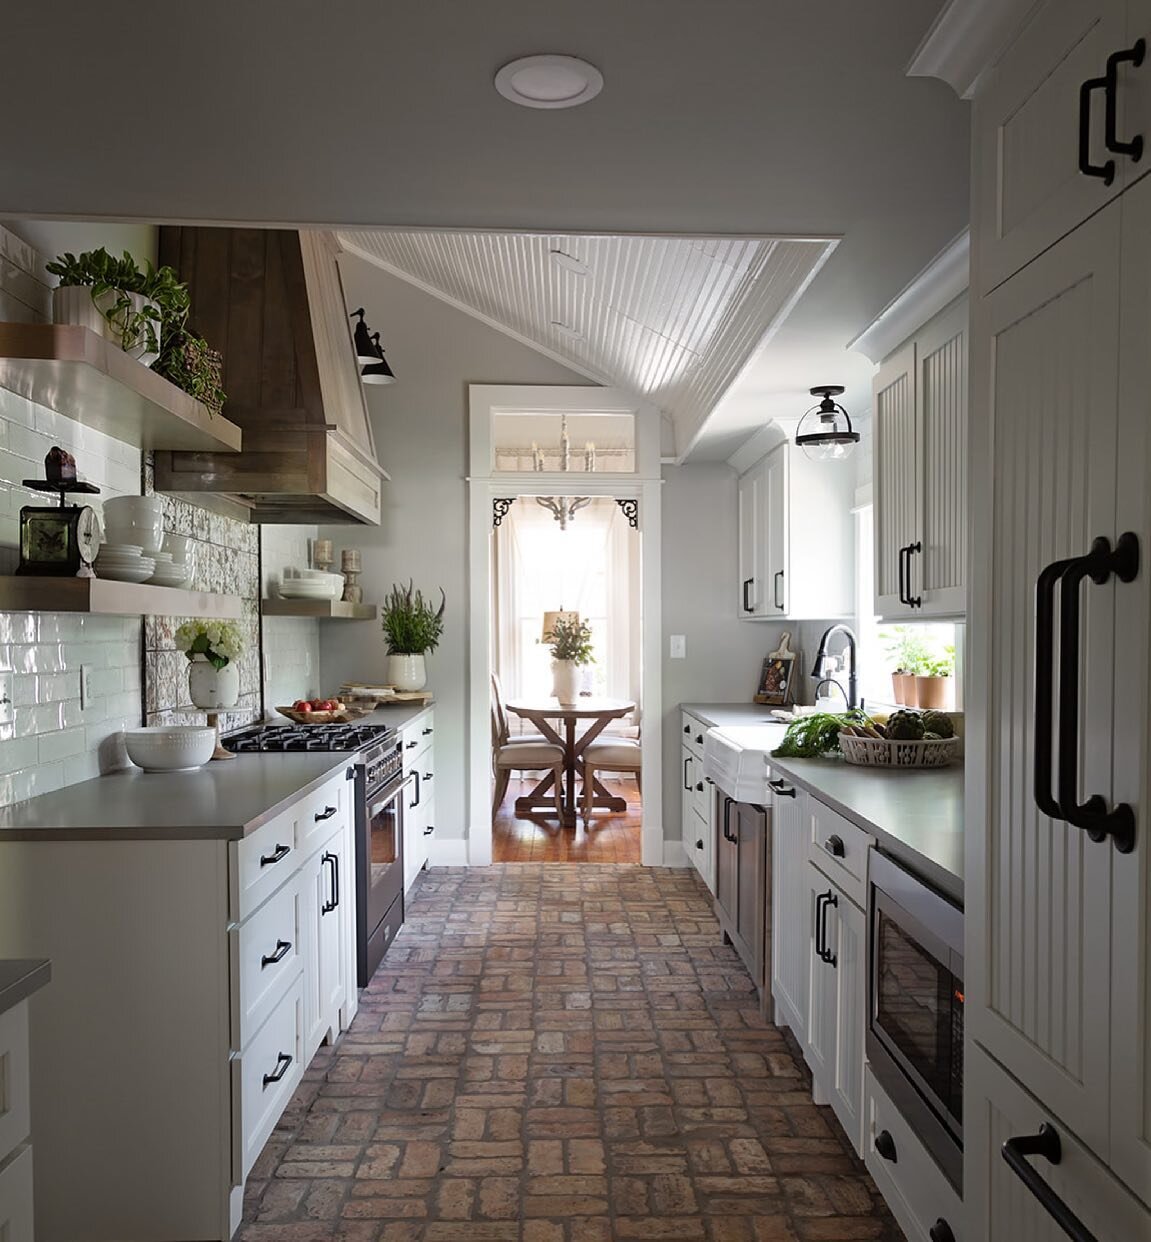 When everyone else is designing open concept plans we&rsquo;re creating the most adorable and full of character galley kitchen. This historic downtown Franklin home was so much fun to work on. @pritchettsmithbuilders did a great job making my vision 